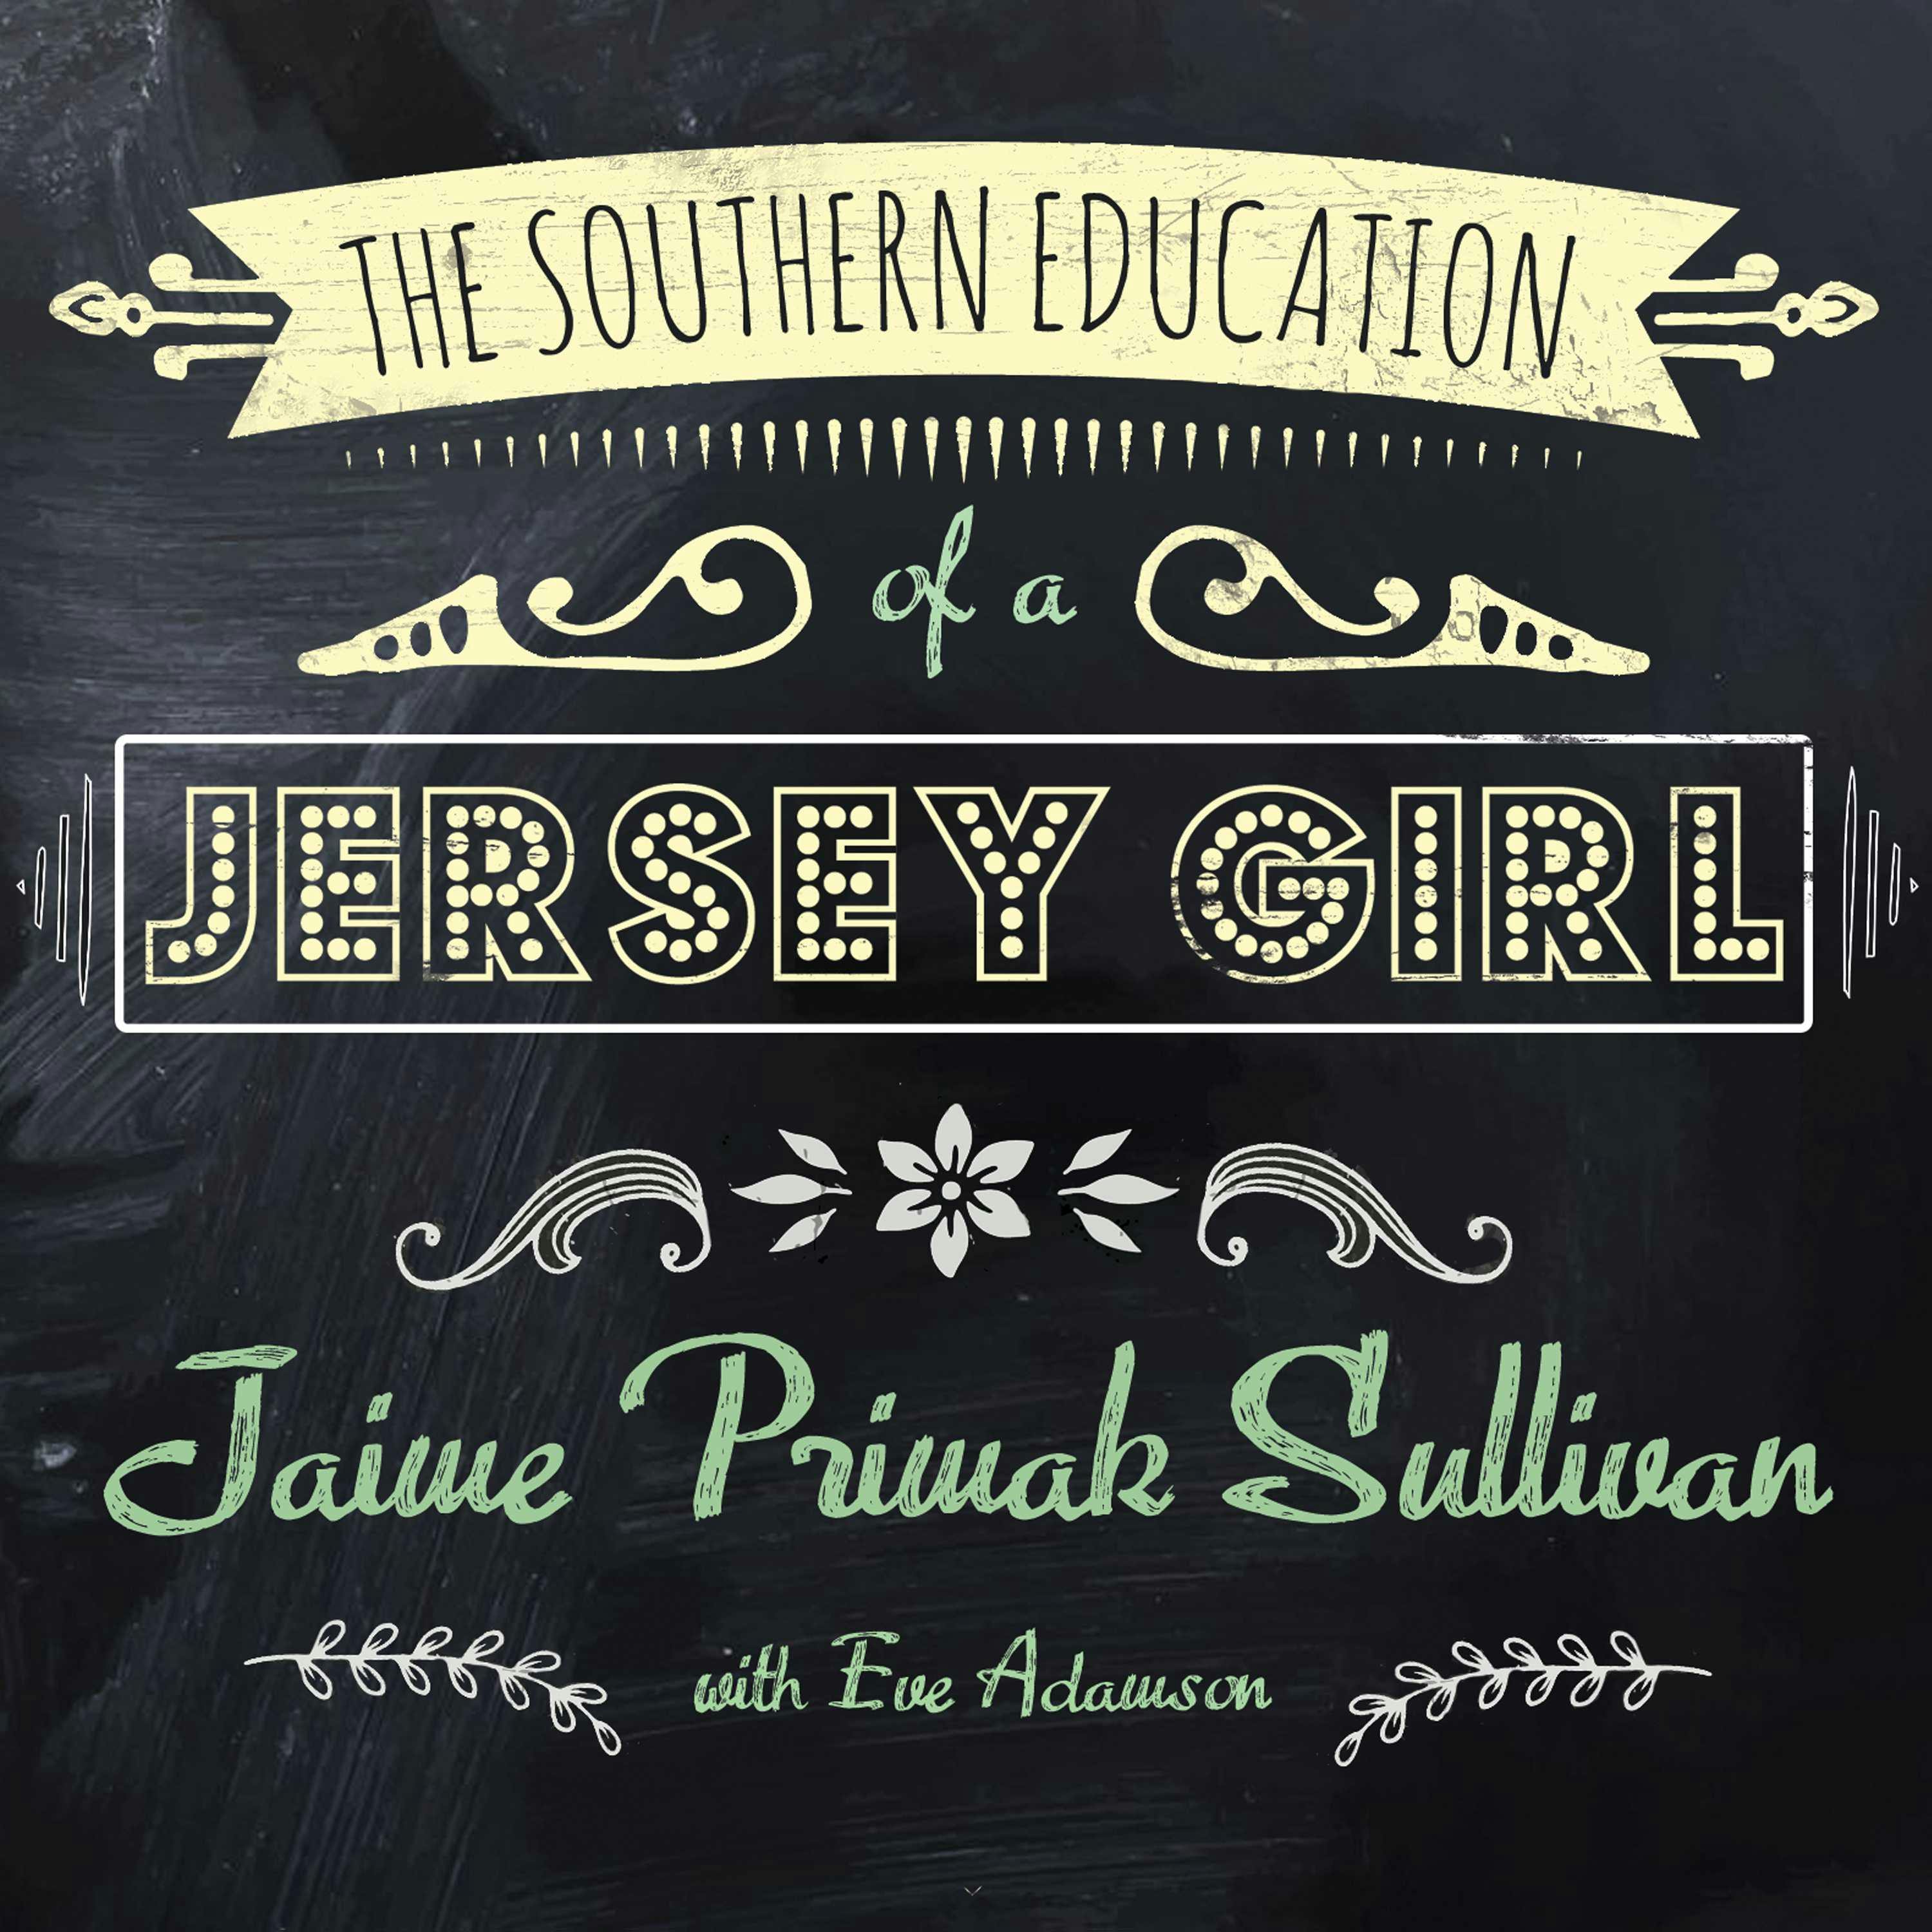 The Southern Education of a Jersey Girl: Adventures in Life and Love in the Heart of Dixie - undefined